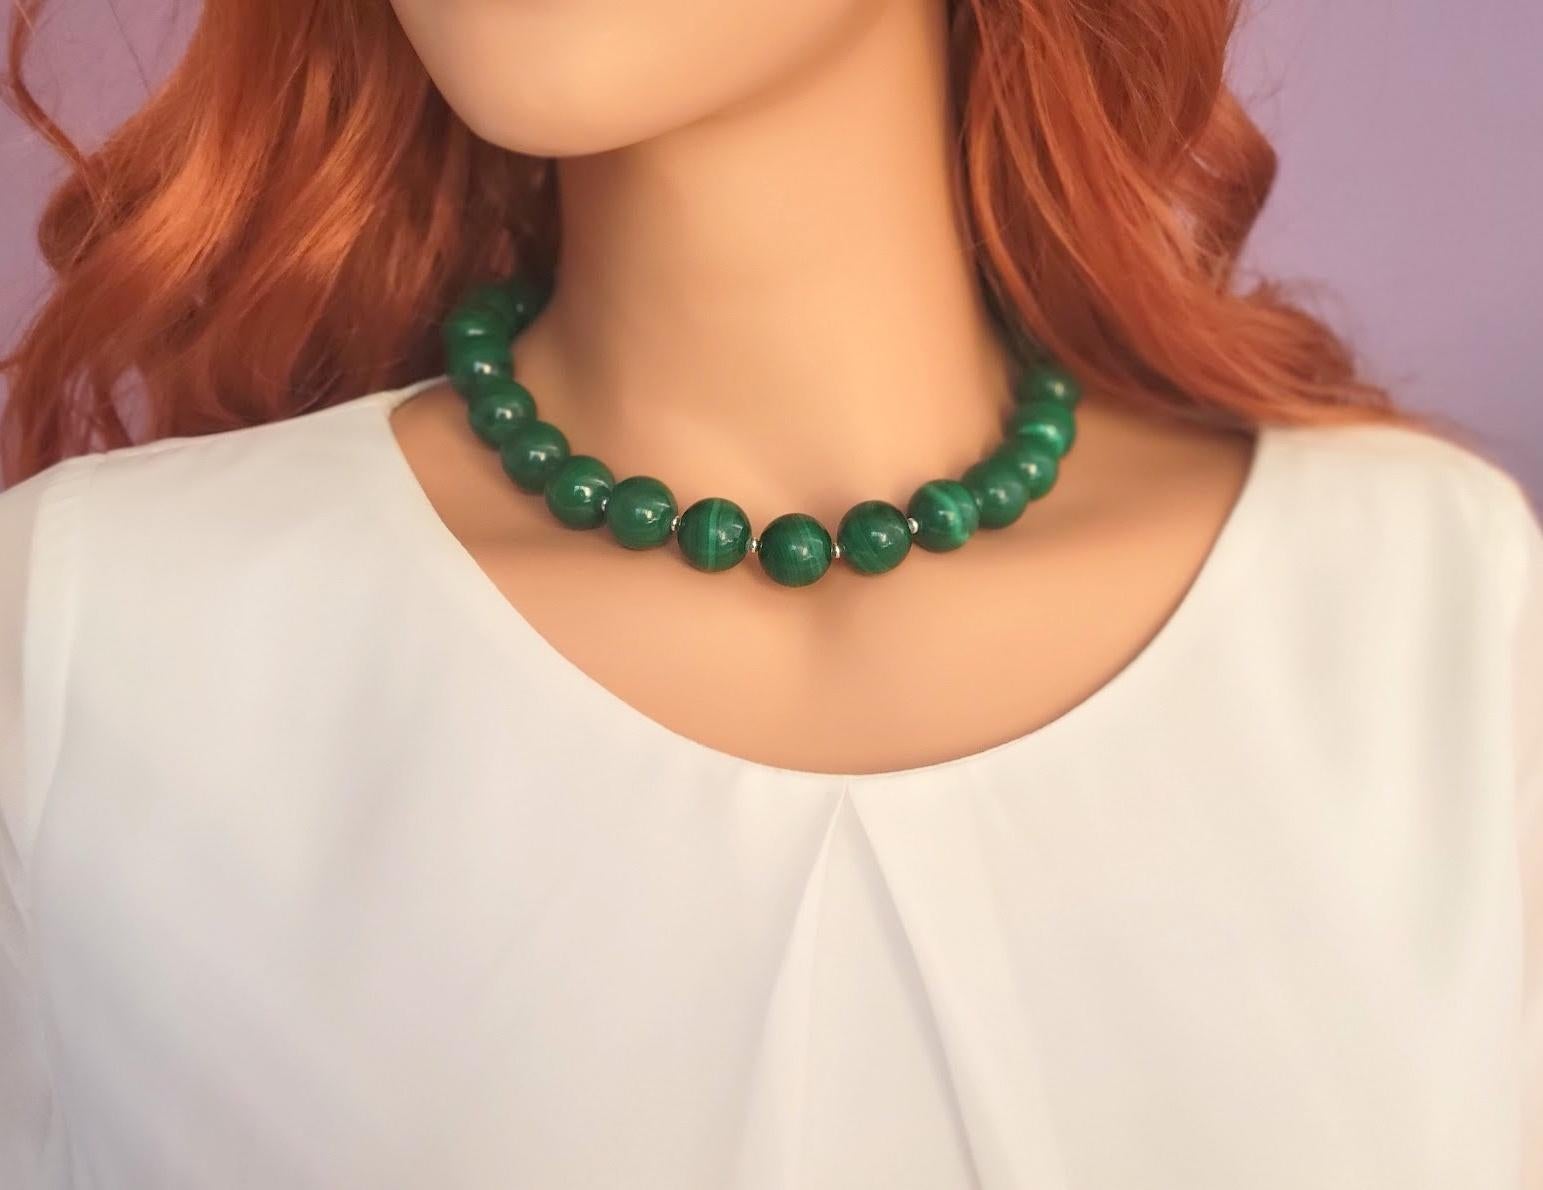 The length of the necklace is 18 inches (45.7 cm). The large size of the smooth round beads is 16 mm.
The color of the beads varies from deep dark green to light green shades. In addition, the color palette within the same stone varies in intensity,